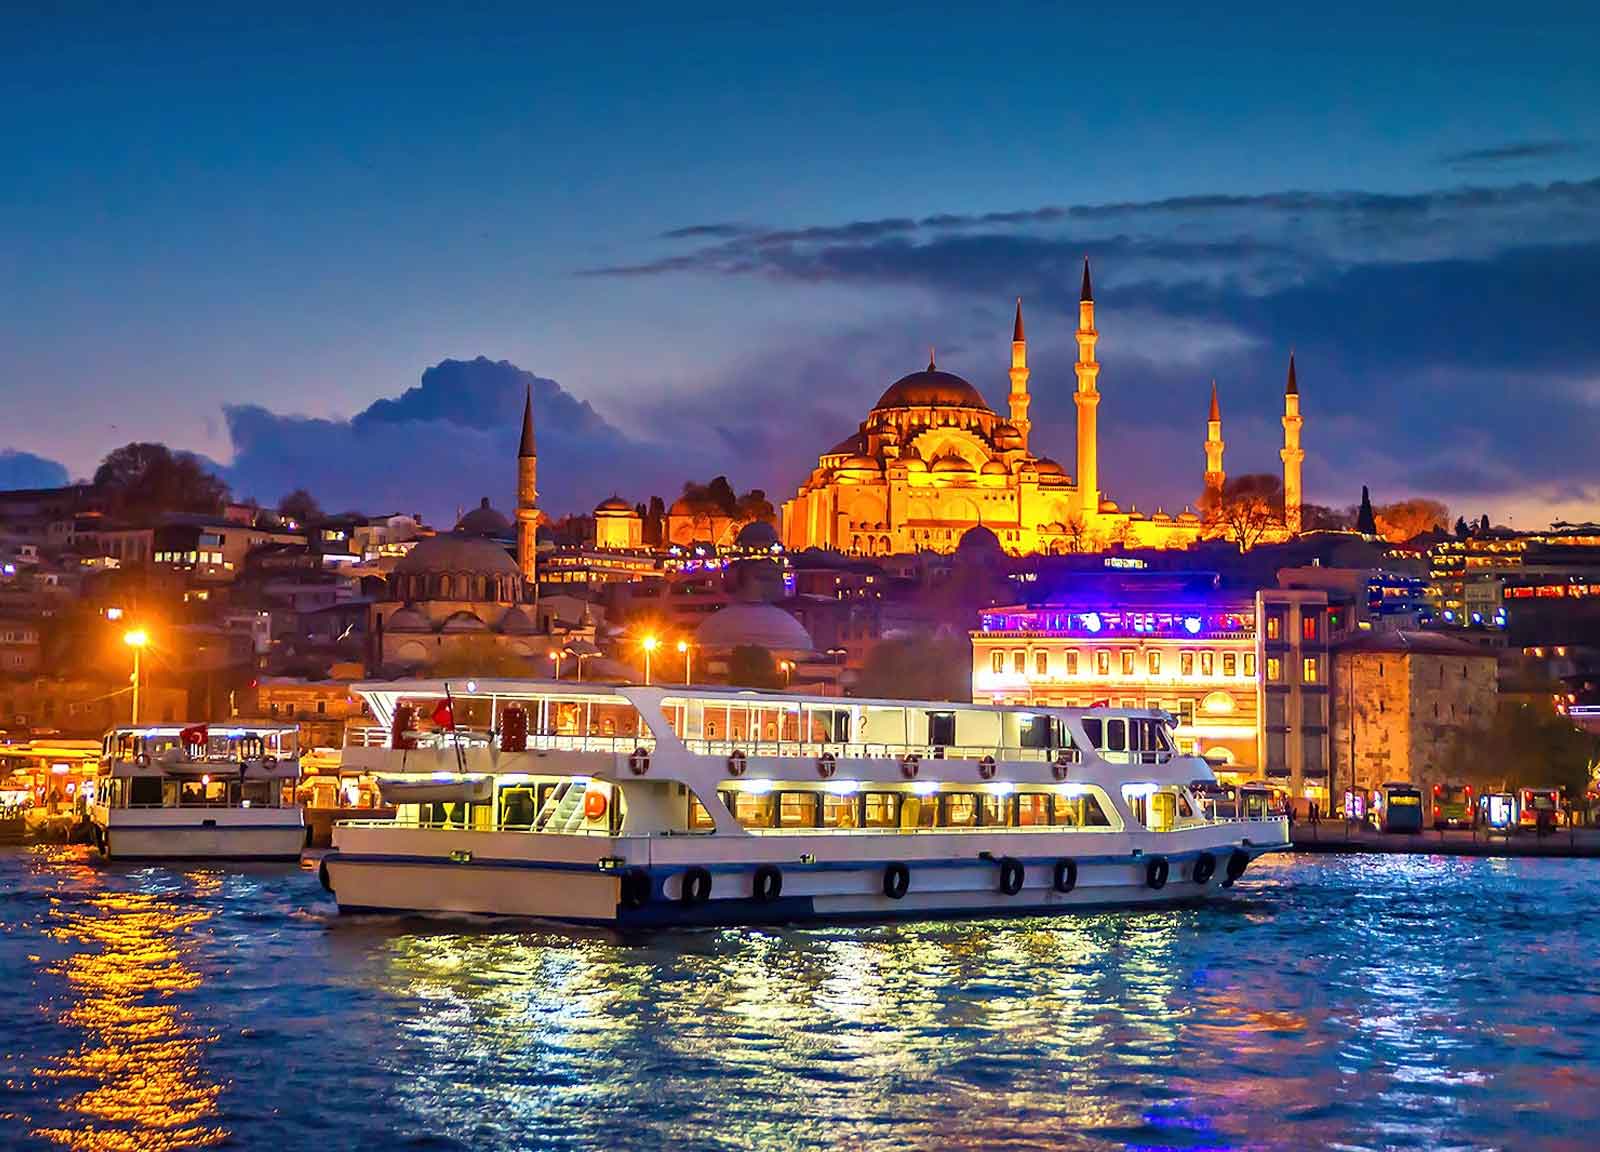 Some Night Activities in Istanbul